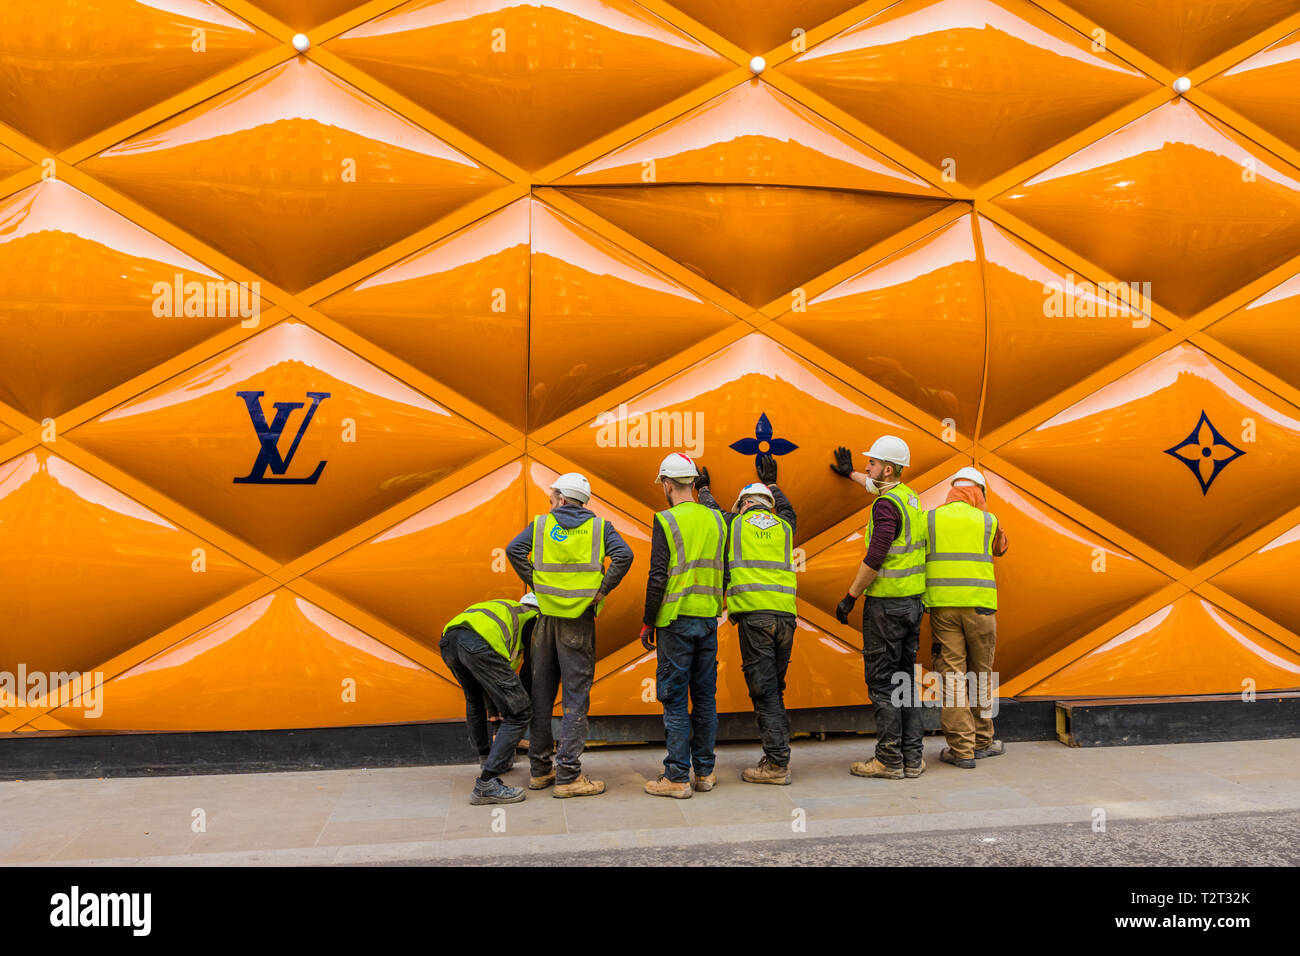 The newly renovated Louis Vuitton flagship store which was opened in New  Bond Street London with the decorations by American designer Sarh Crowner  Stock Photo - Alamy